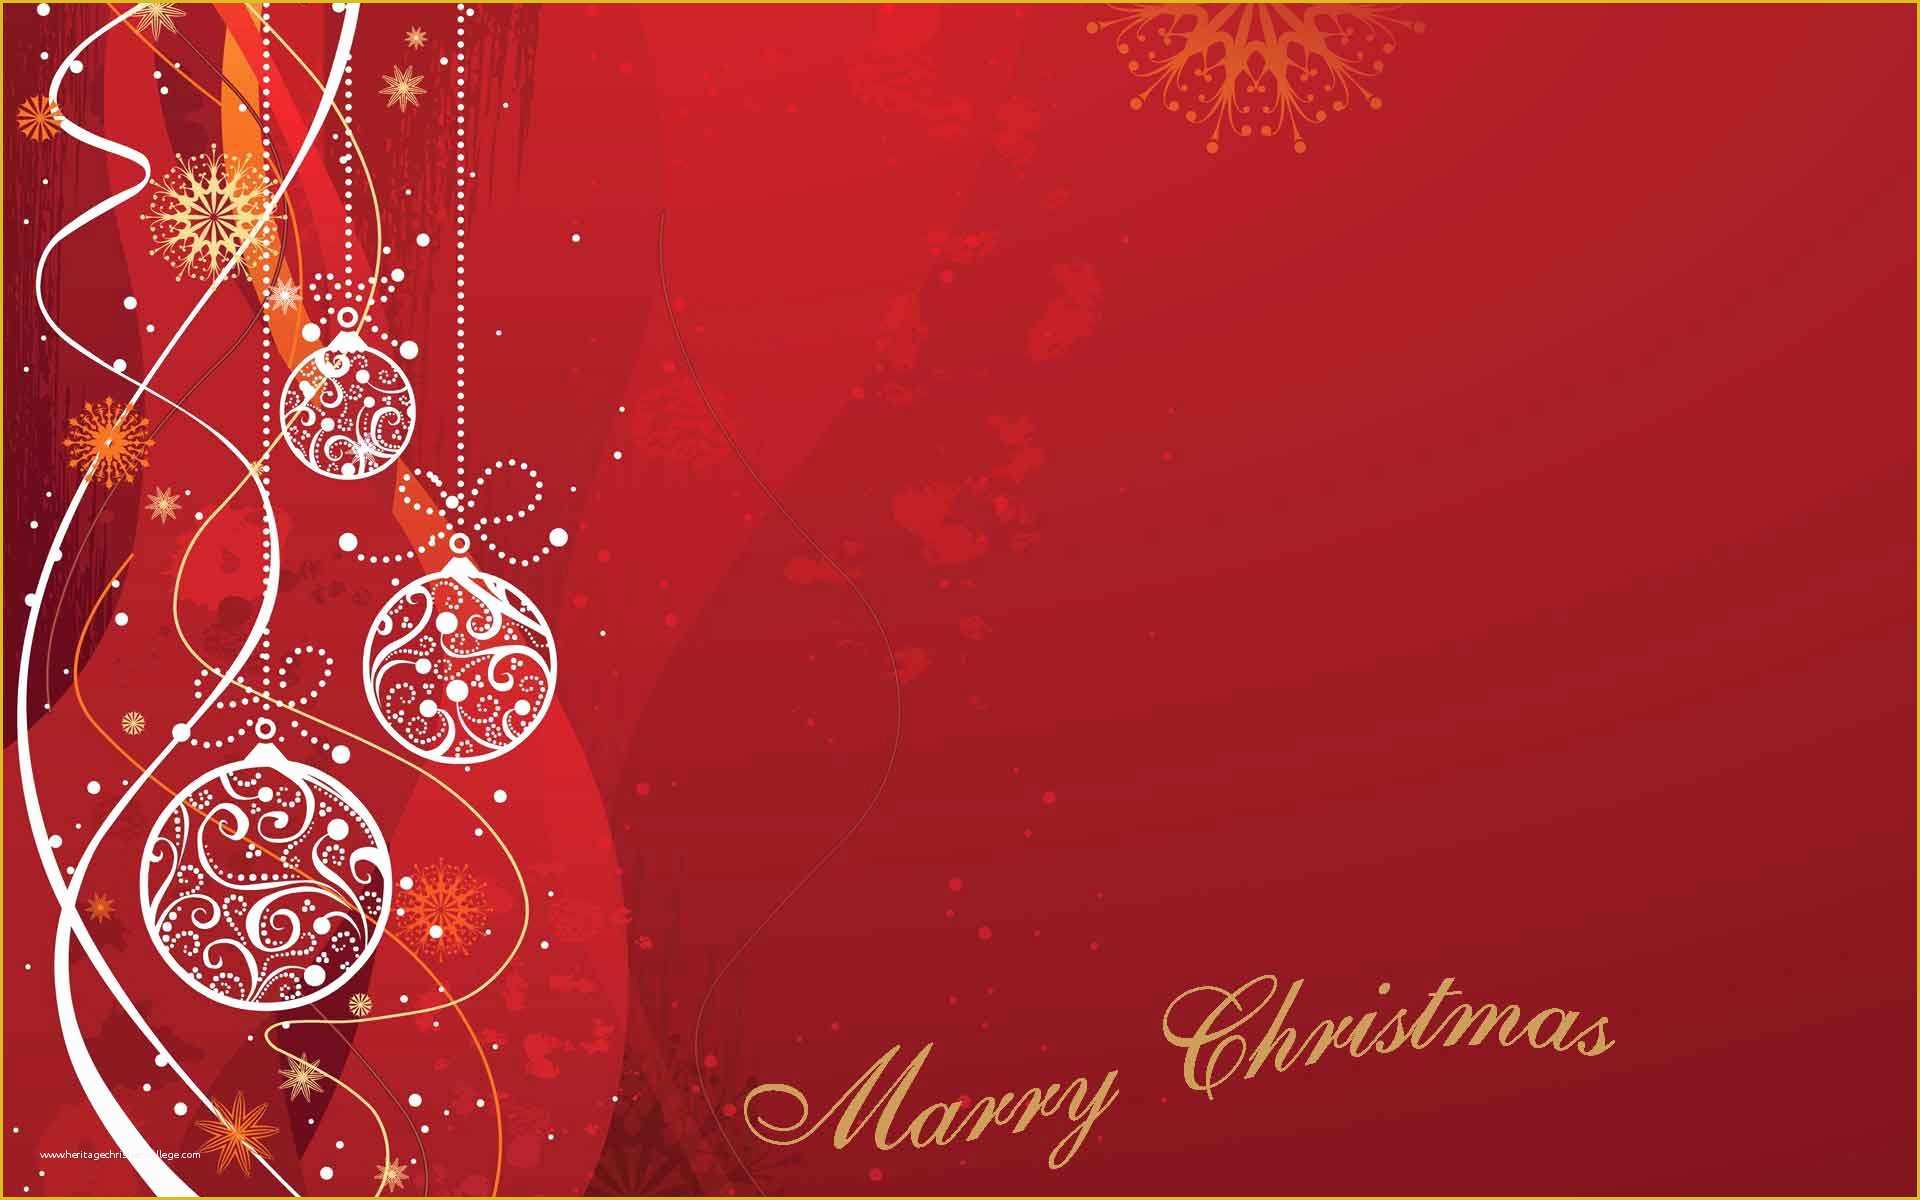 Free Christmas Card Templates for Email Of Free Christmas Card Templates for Email – Fun for